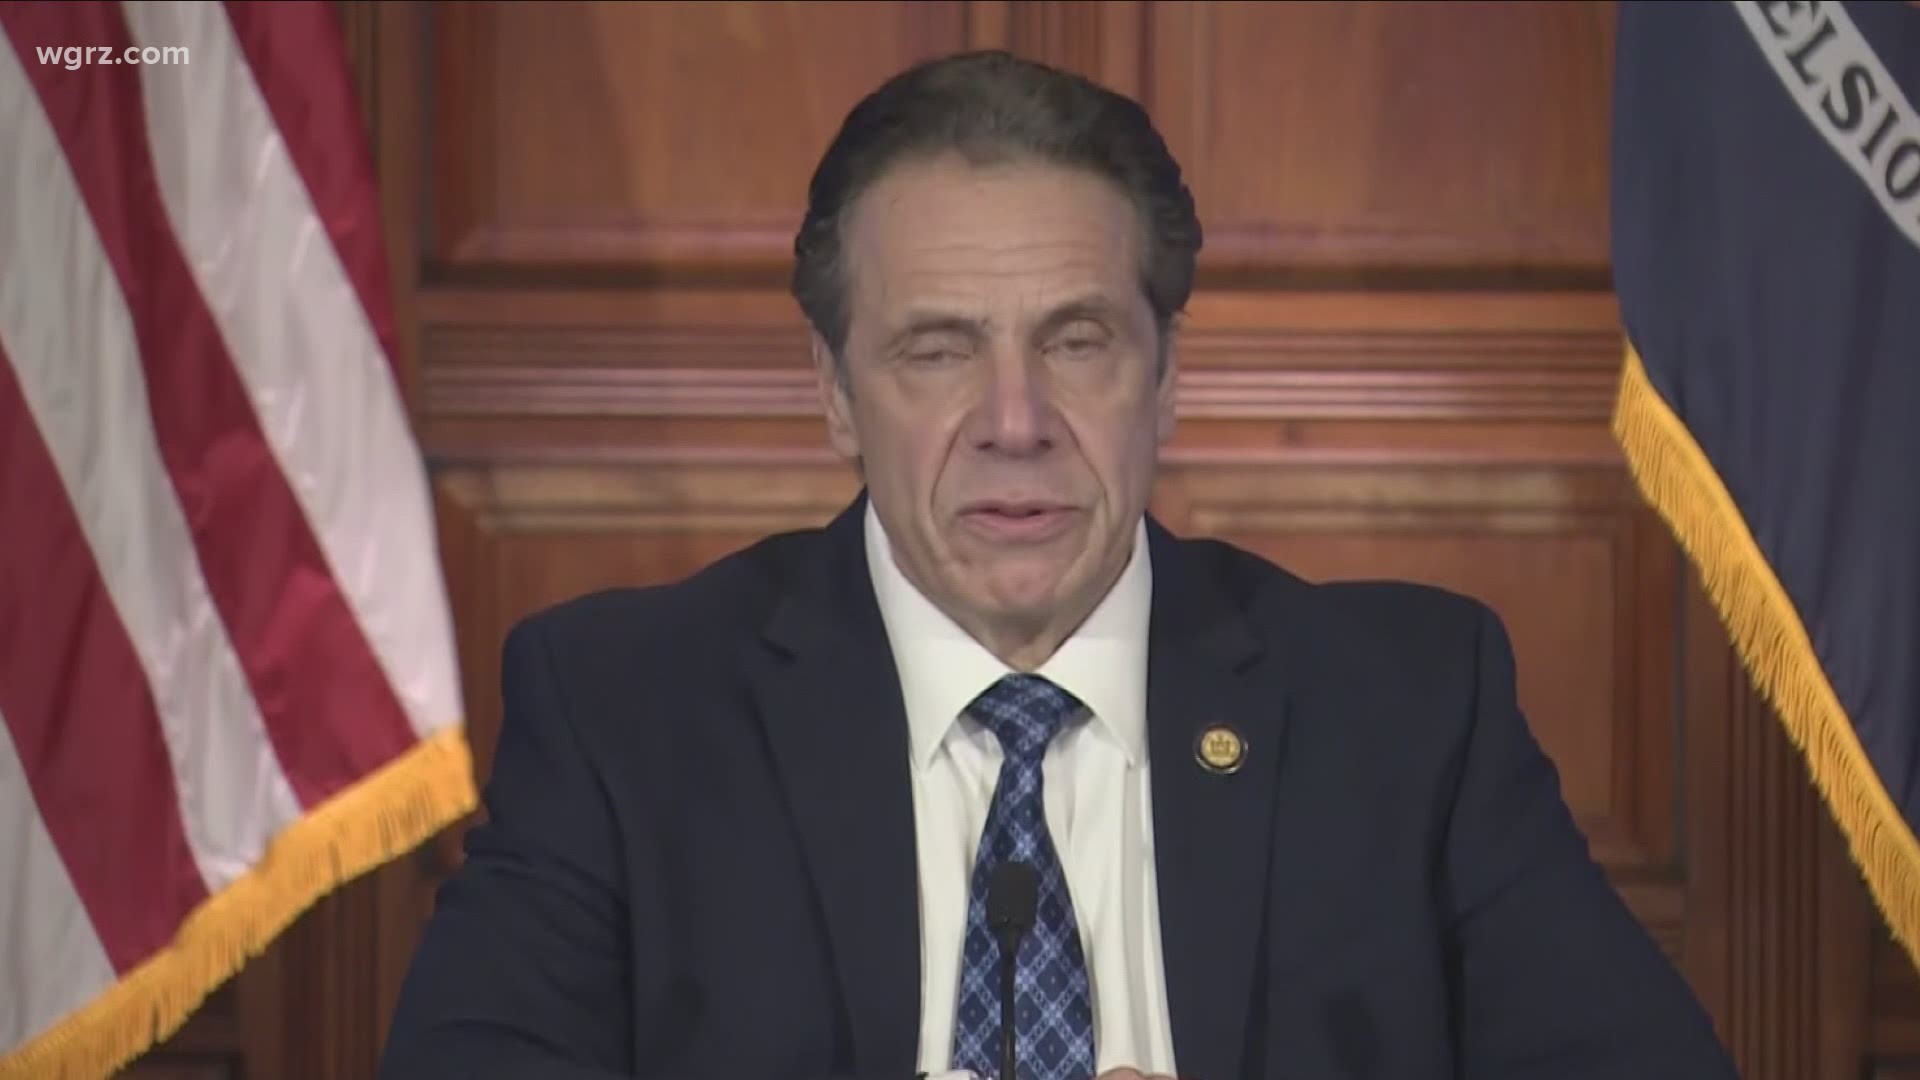 Governor Cuomo spoke at length today, again defending his actions in the nursing home scandal, saying the state created a "void" by not producing enough public info.